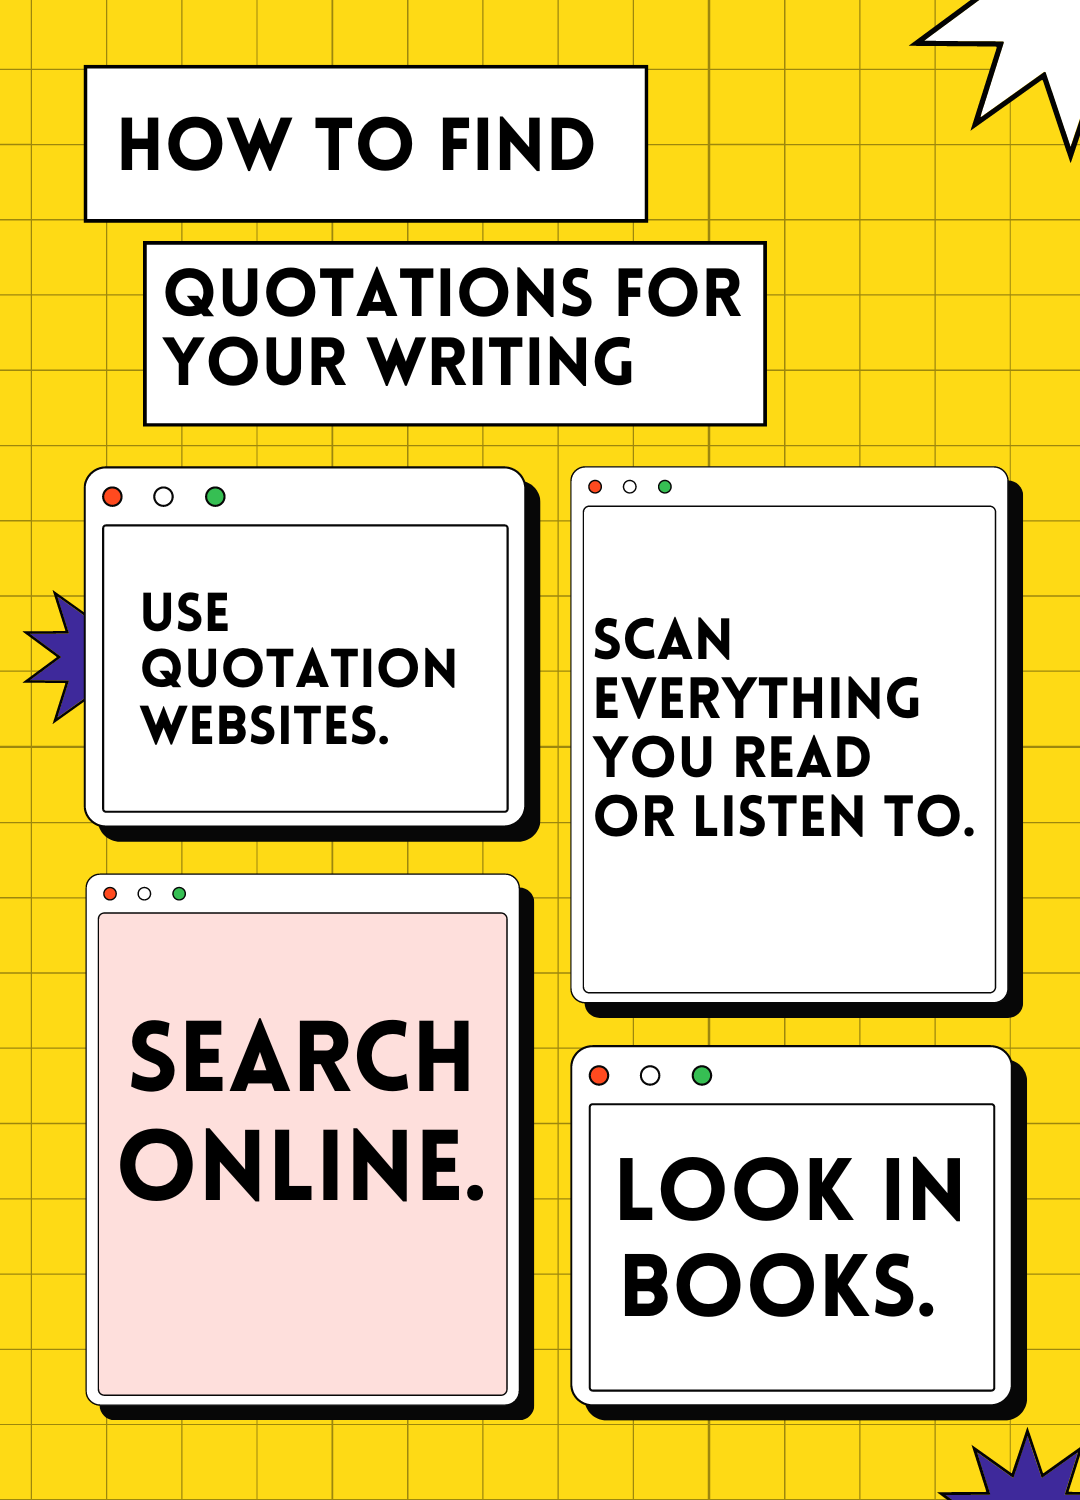 Quotation websites for your writing infographic